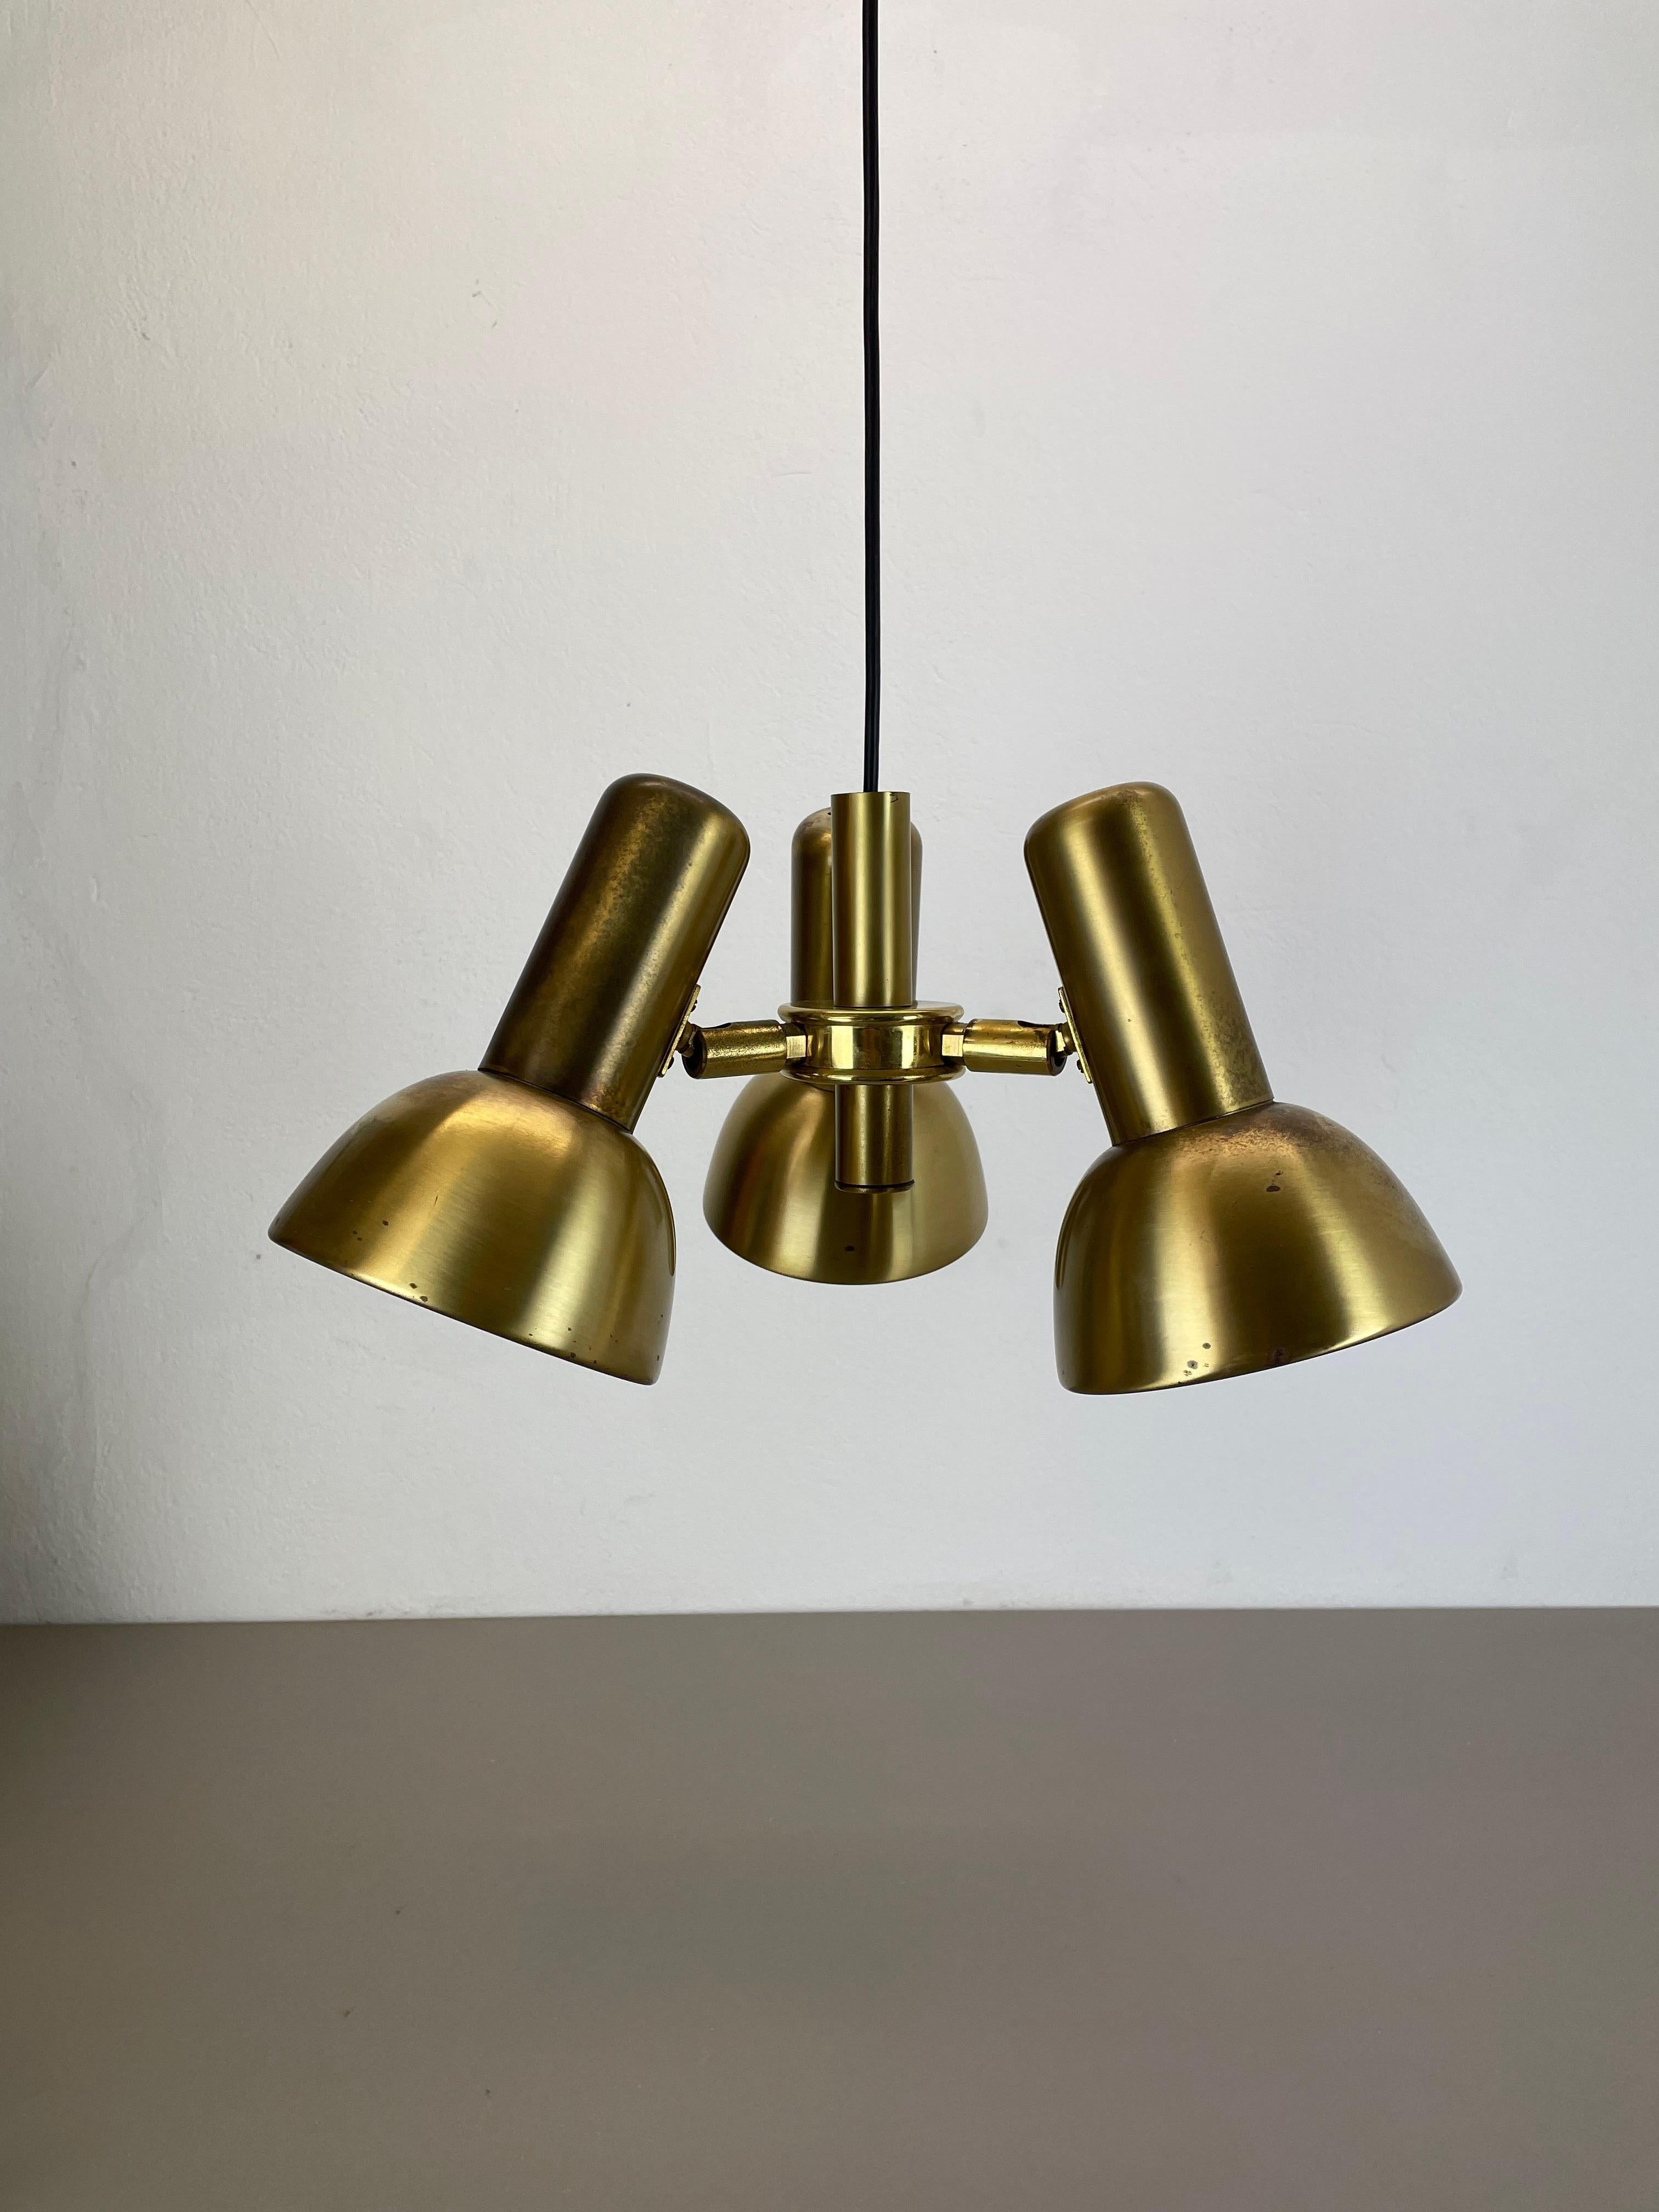 Article:

Hanging light with 3 light spots


Producer:

OMI Lighting, Germany


Design:

in style of Koch & Lowy



Origin:

Germany



Age:

1970s





Original 1970s modernist German pendant Light made of glass and